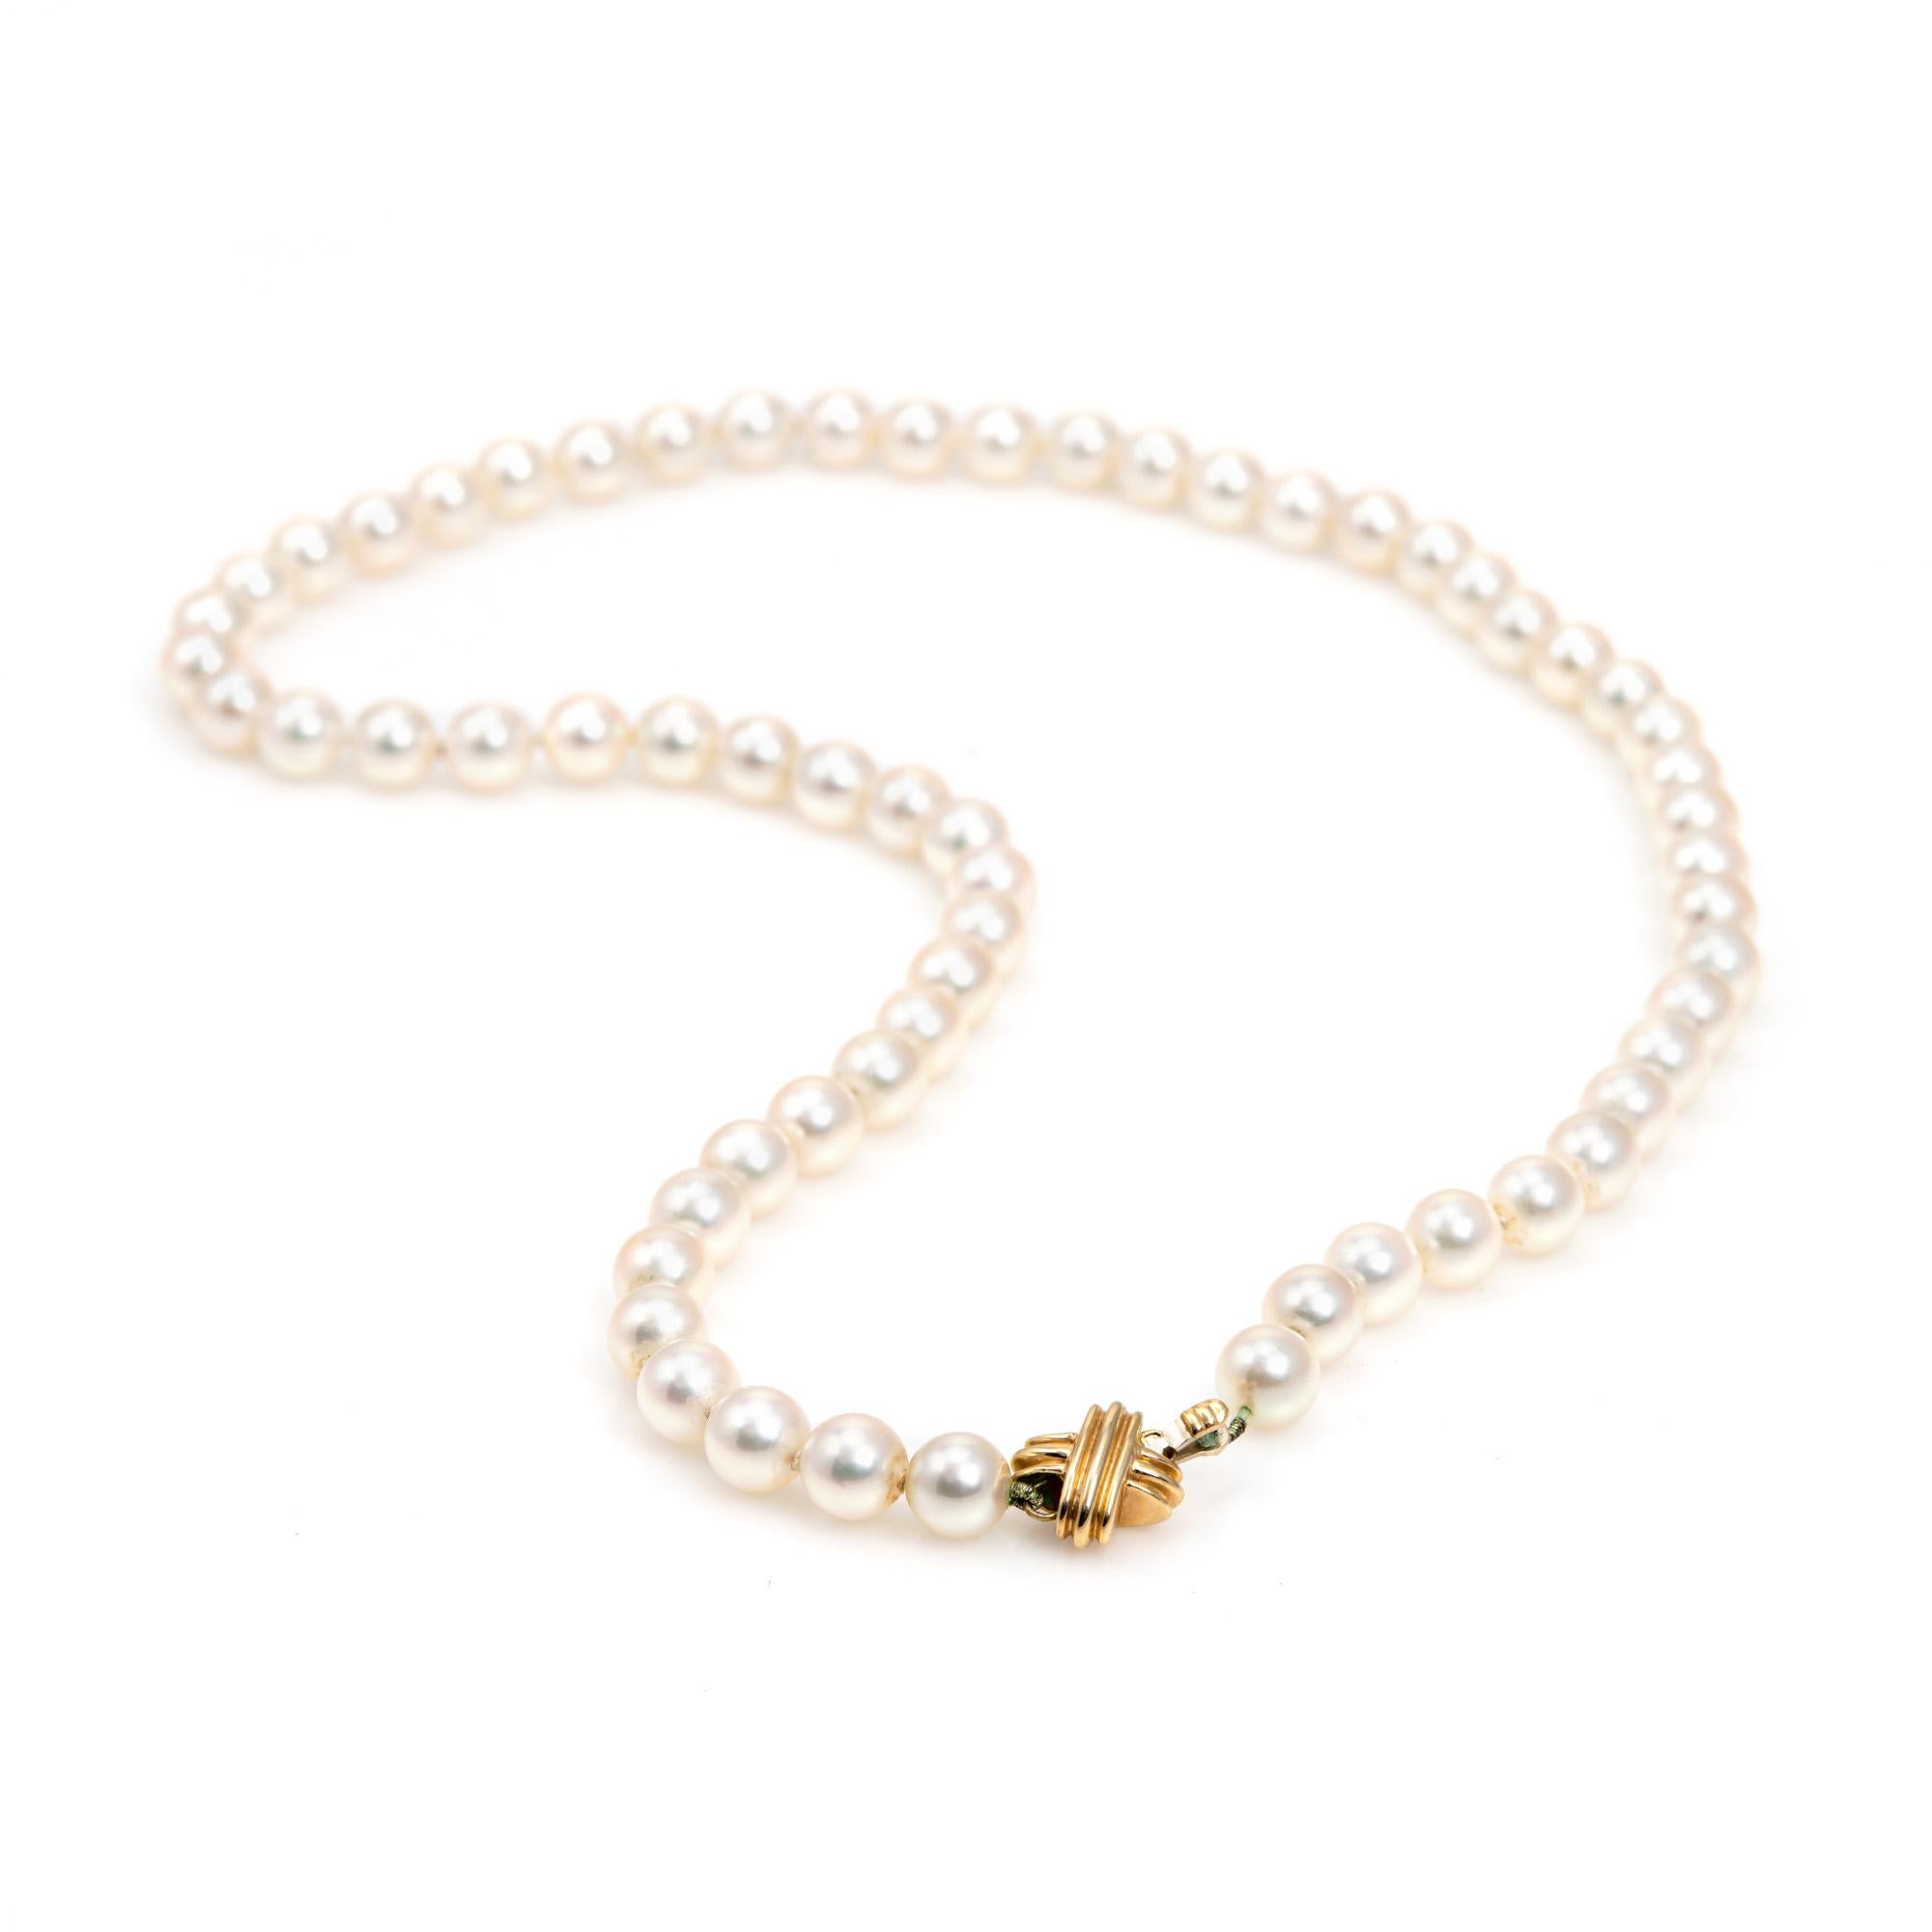 Stylish pre owned Tiffany & Co essential cultured pearls 18